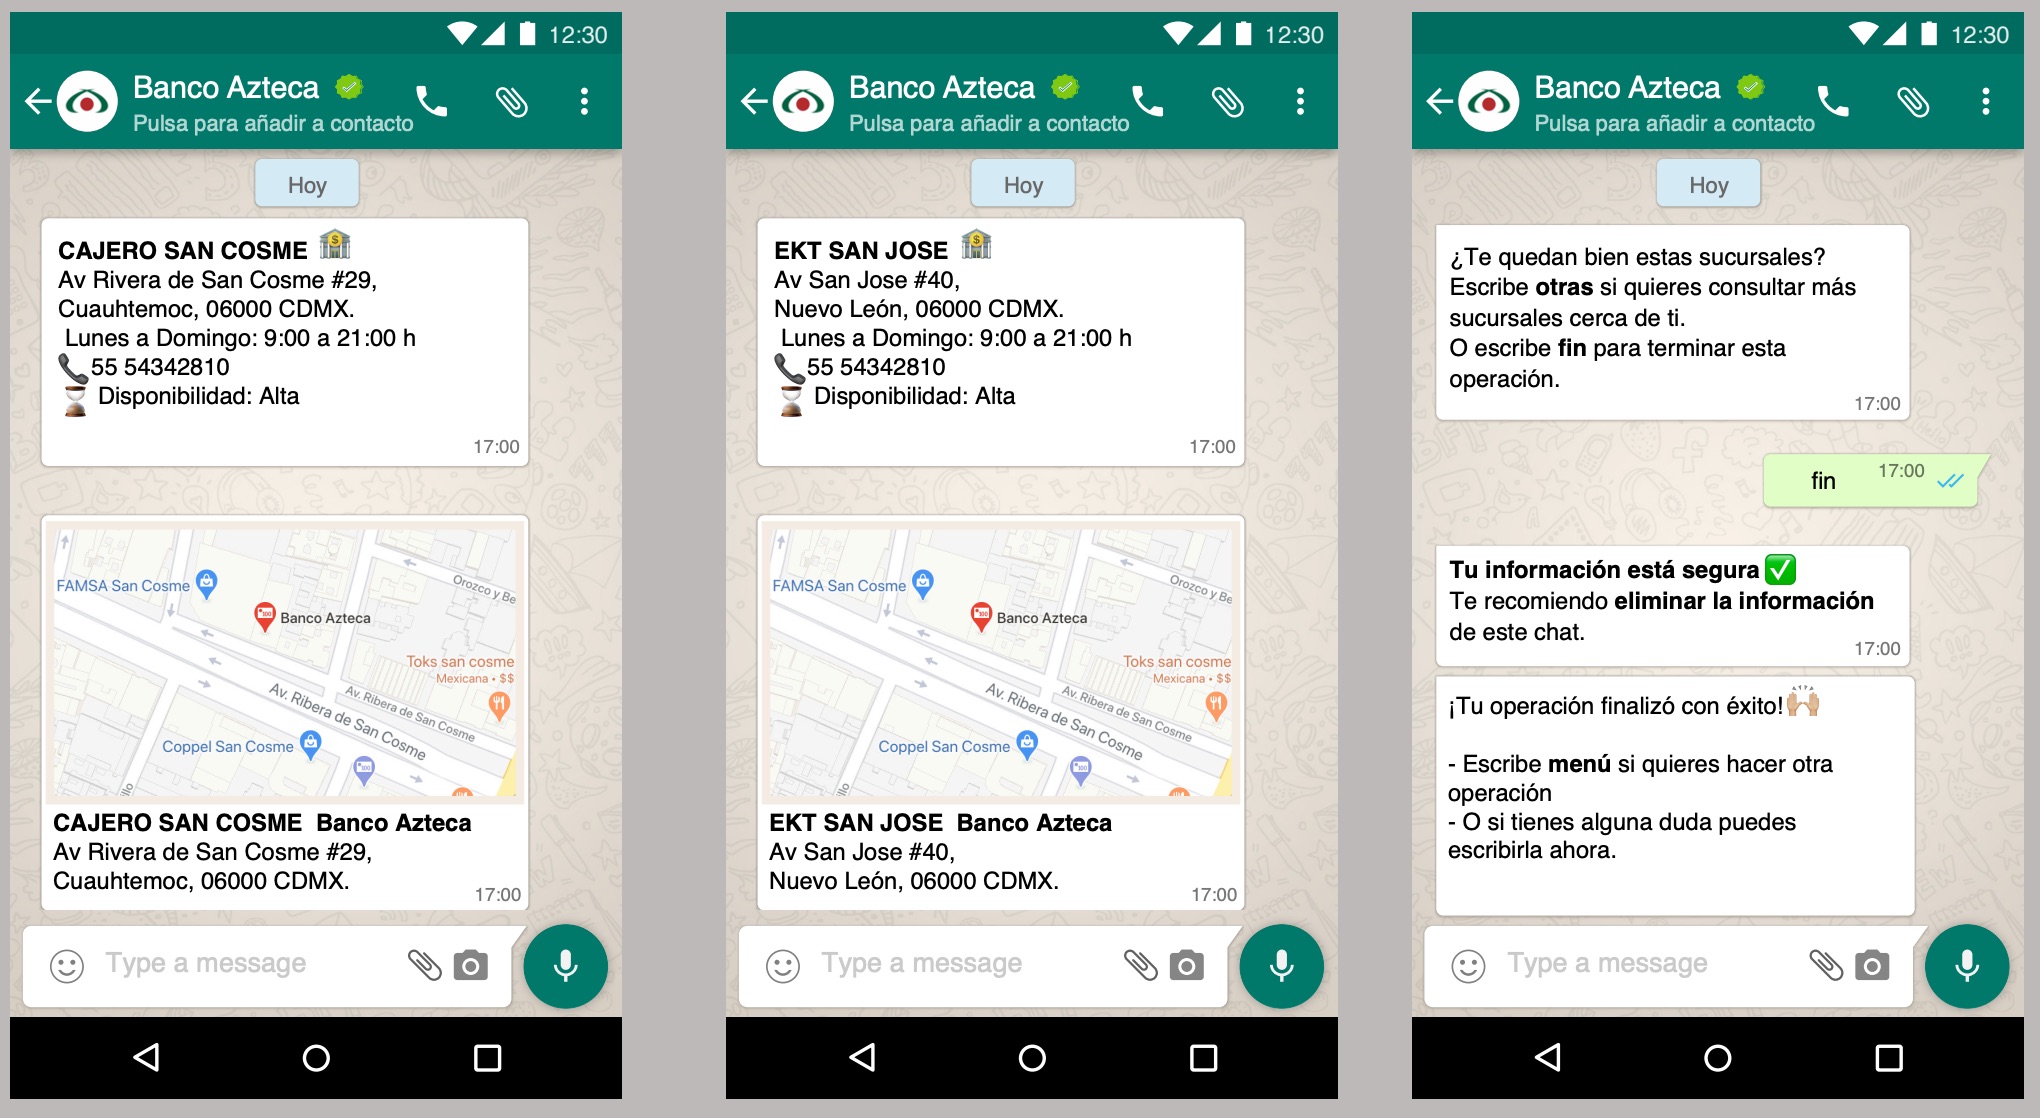 Store Locator WhatsApp flow
click to enlarge